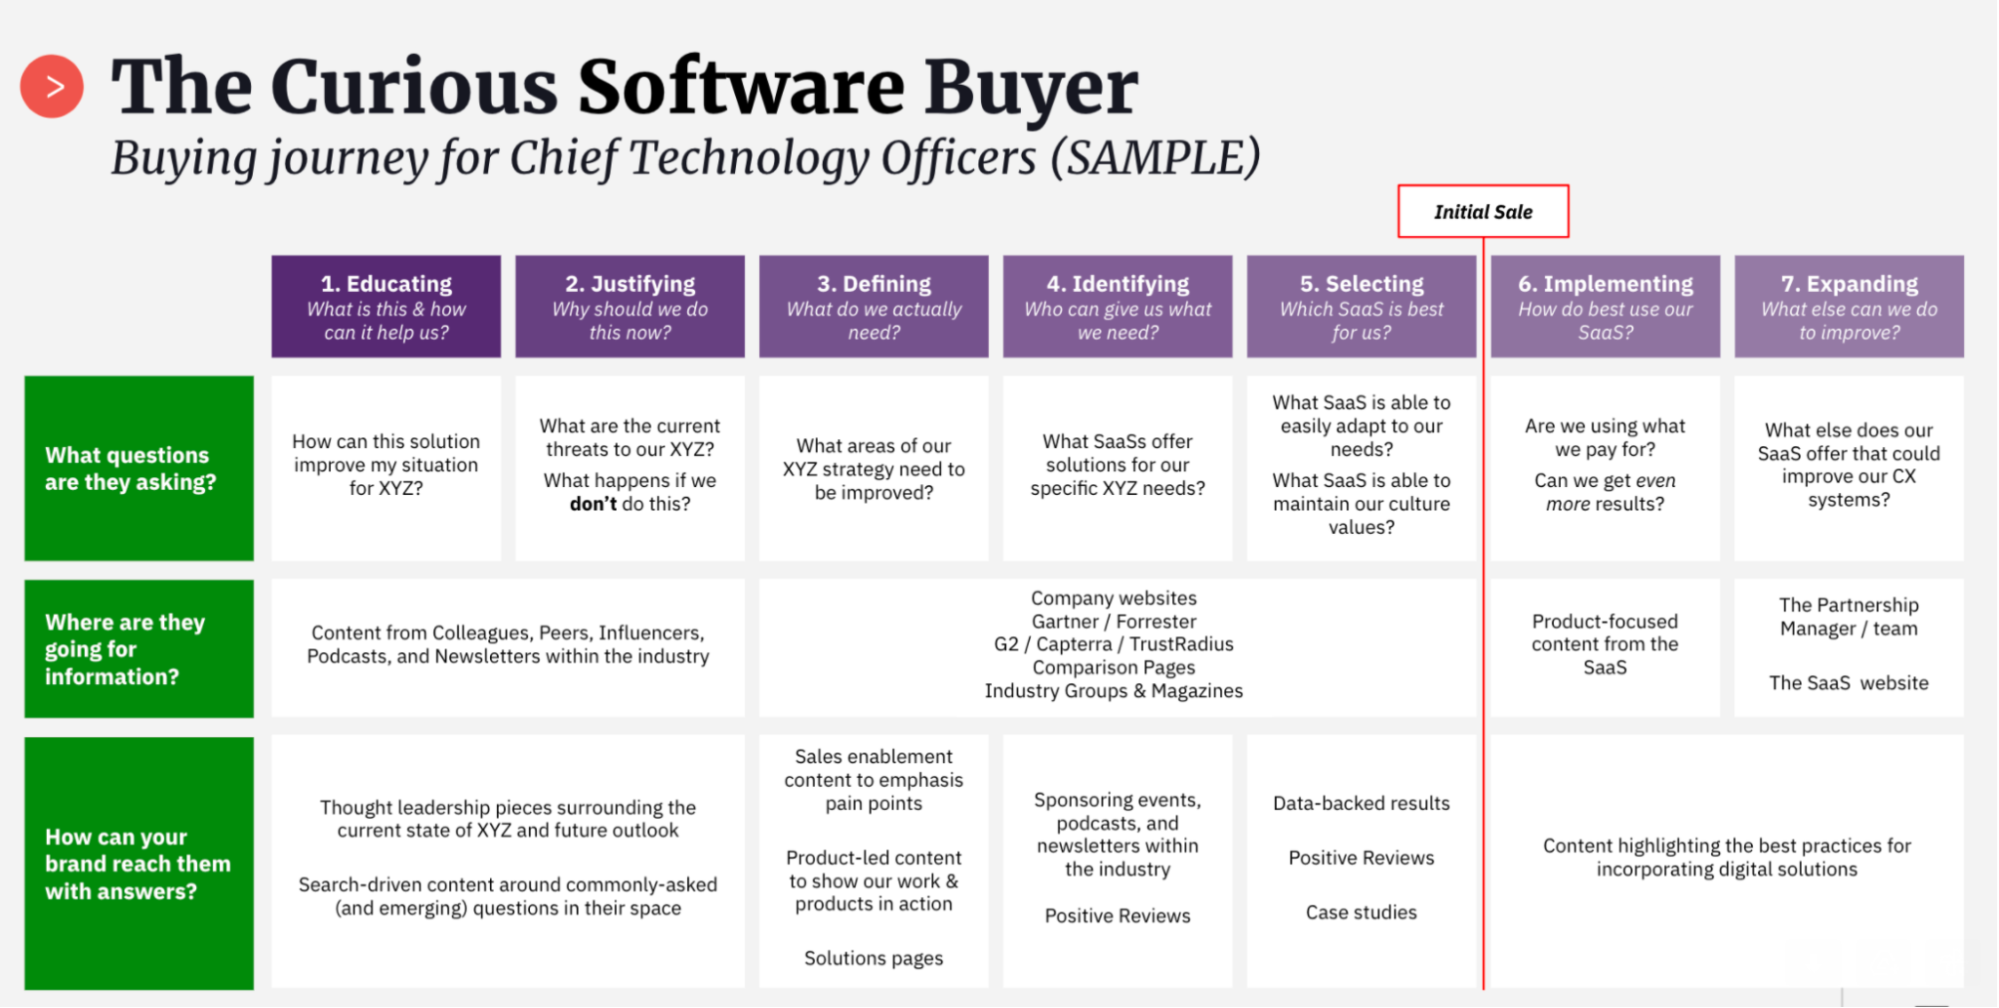 The Curious Software Buyer's journey